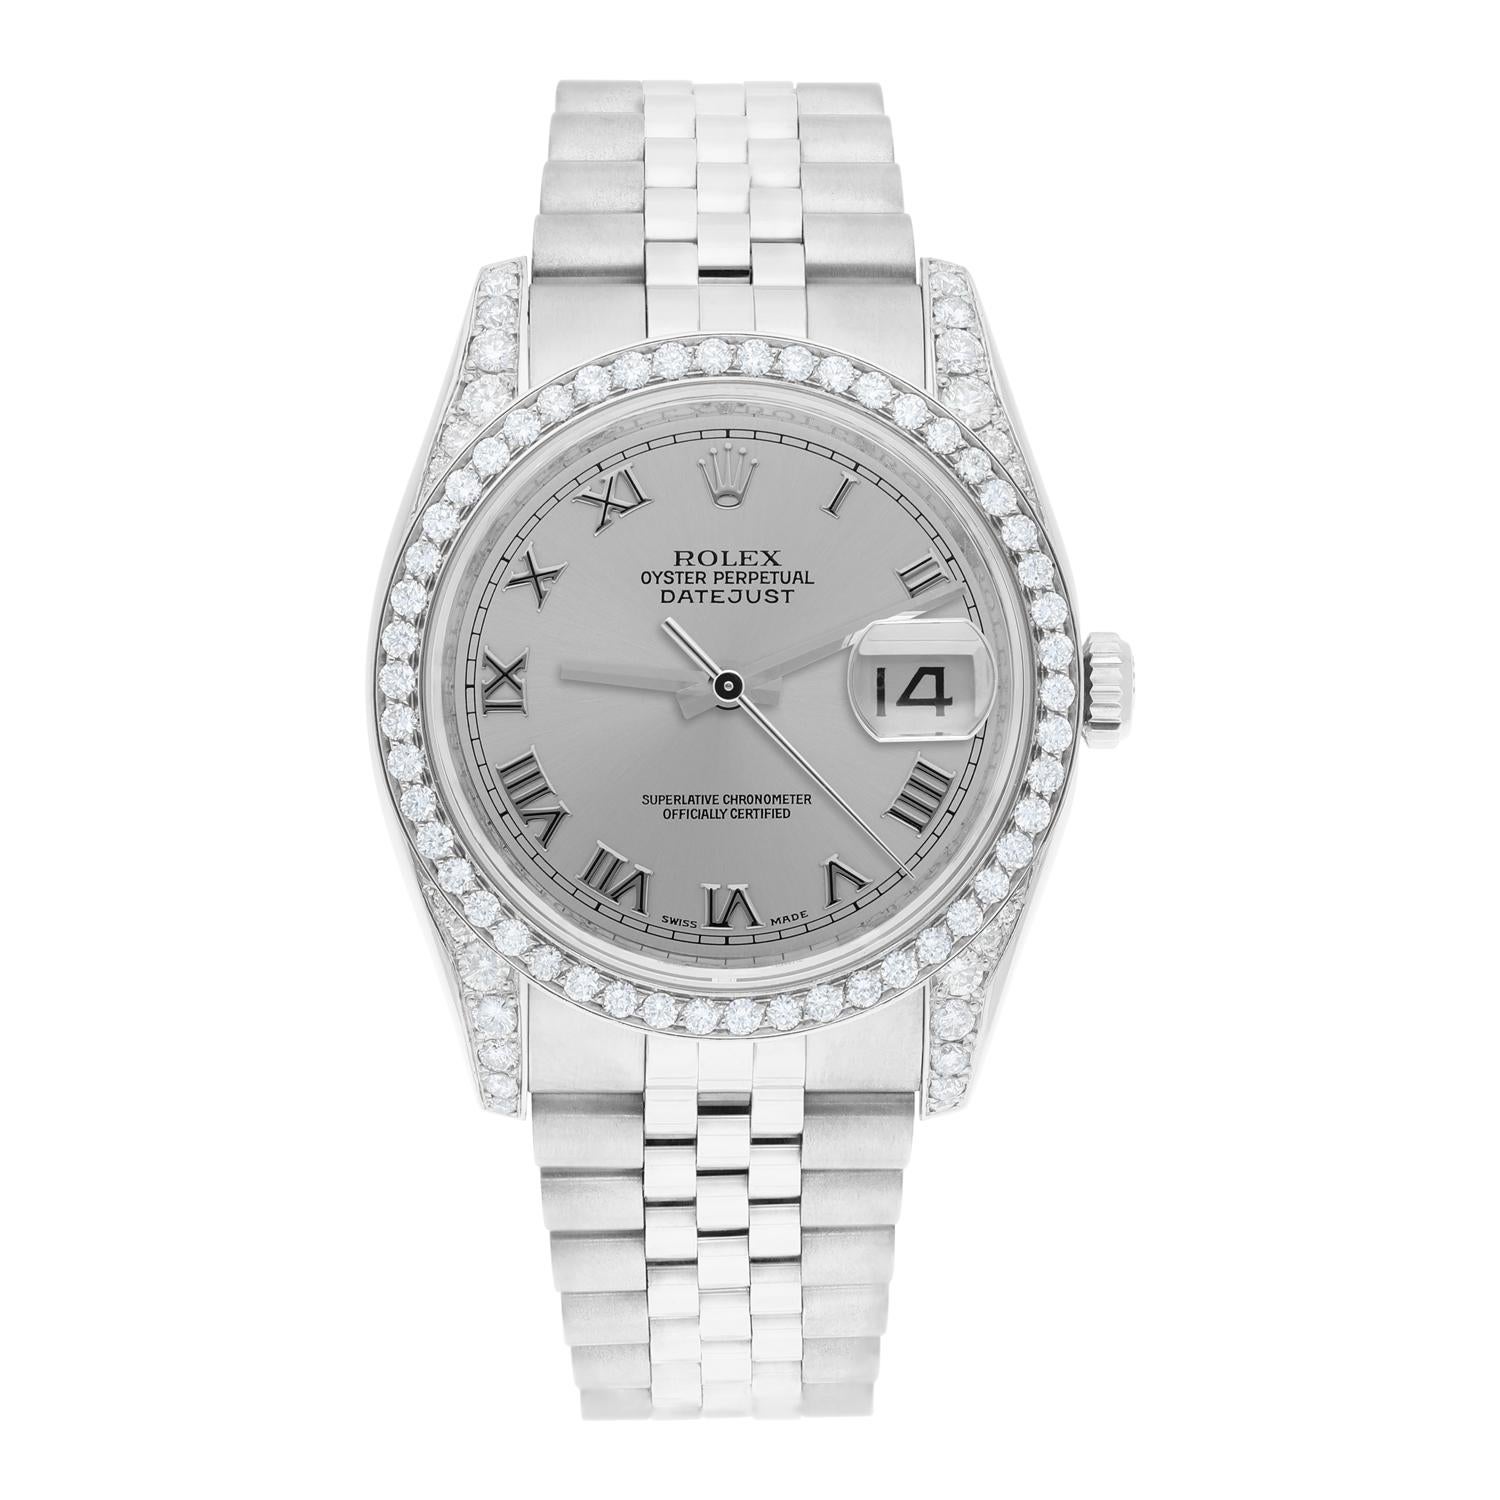 Brand: Rolex
Series: Datejust 
Model: 116234
Case Diameter: 36 mm
Bracelet: Jubilee band; stainless steel
Bezel. and Lugs: Custom Diamond Set
Dial: Silver Roman
Carat Weight: 2.30 carats in total diamond weight
The sale includes a Rolex box and an